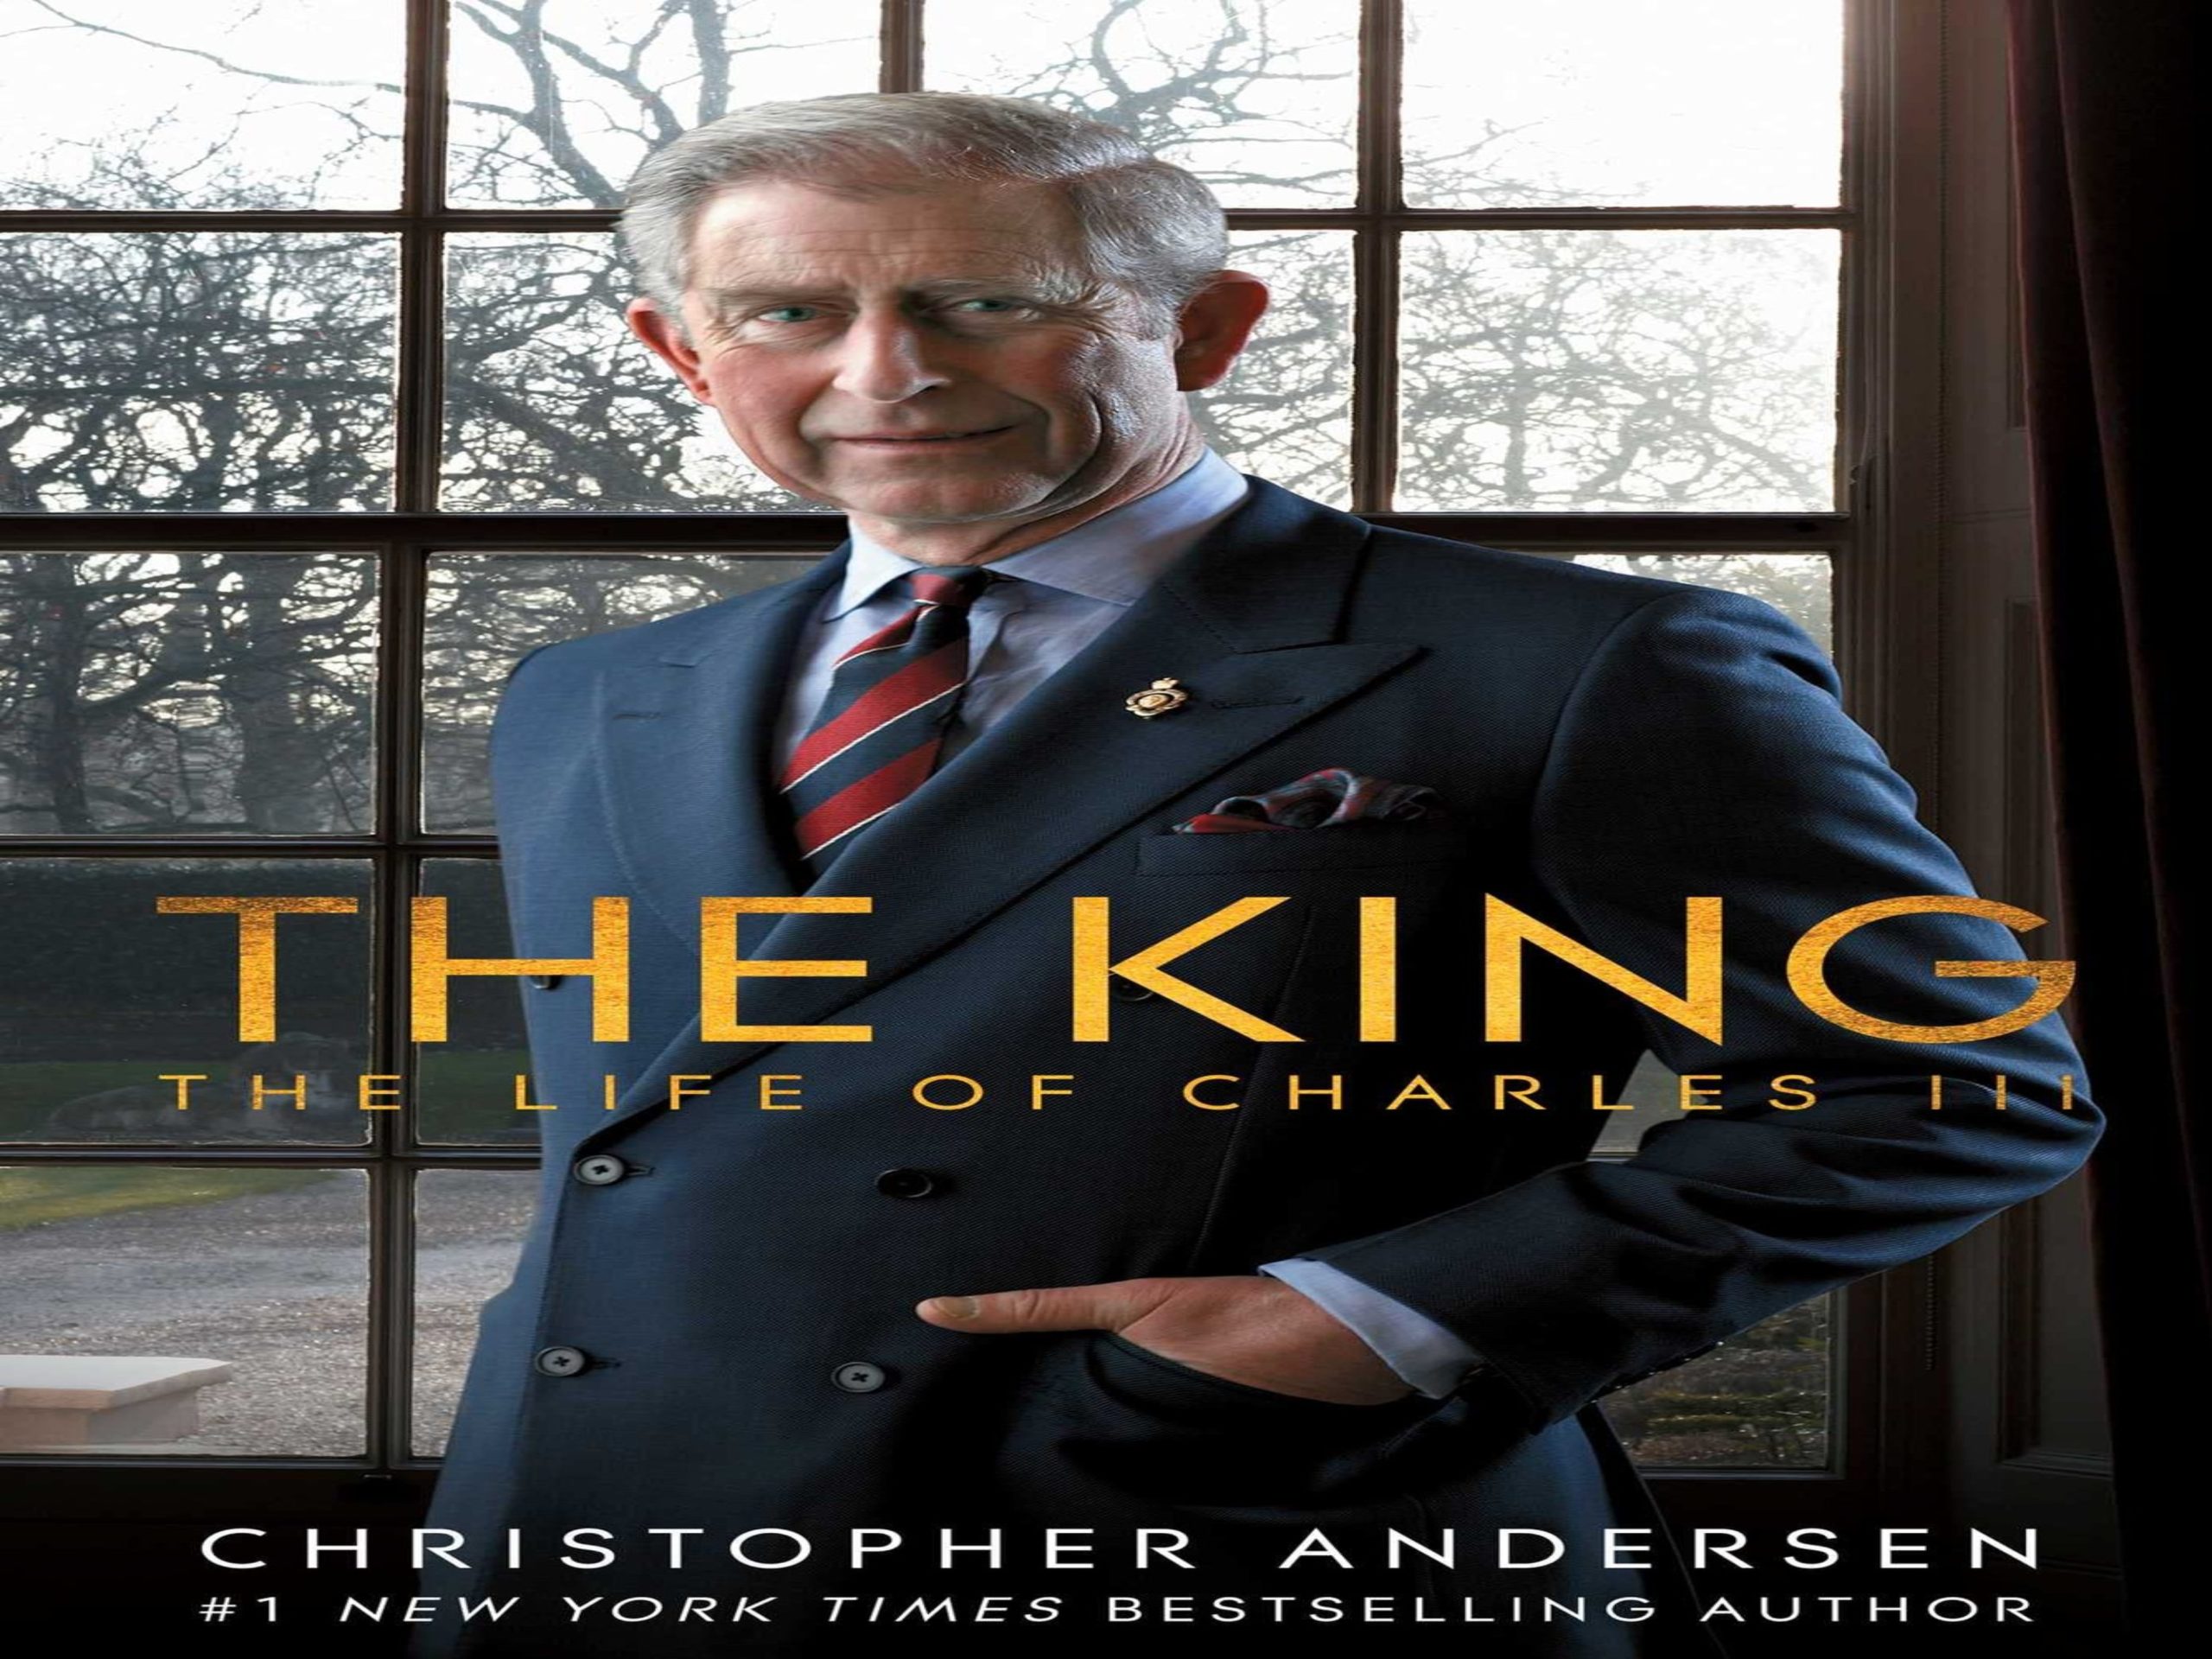 The King: The Life of Charles III by NYT bestselling author Christopher Andersen released